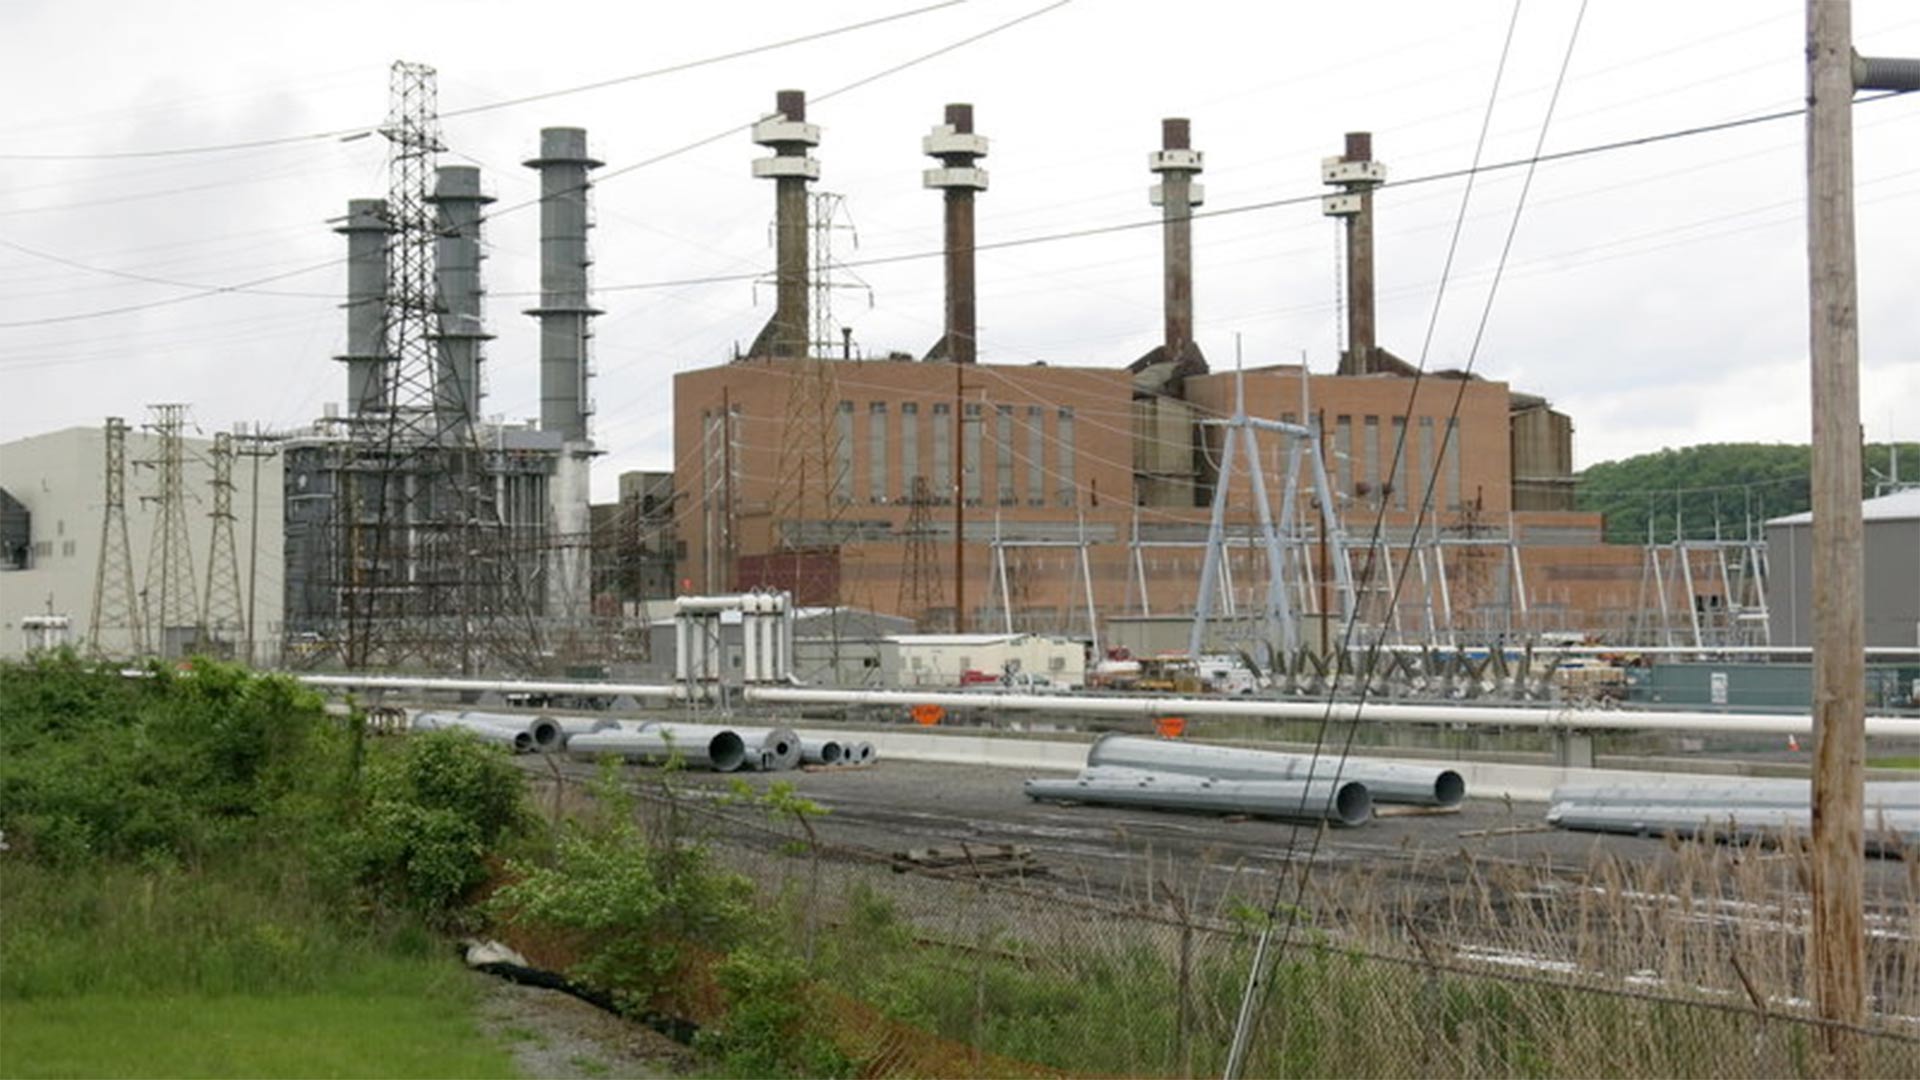 The coal plant in Shamokin Dam, Pa., is a local landmark that delivered electricity to this region for more than six decades. It closed in 2014, and the state hopes to lure new businesses to the site.
